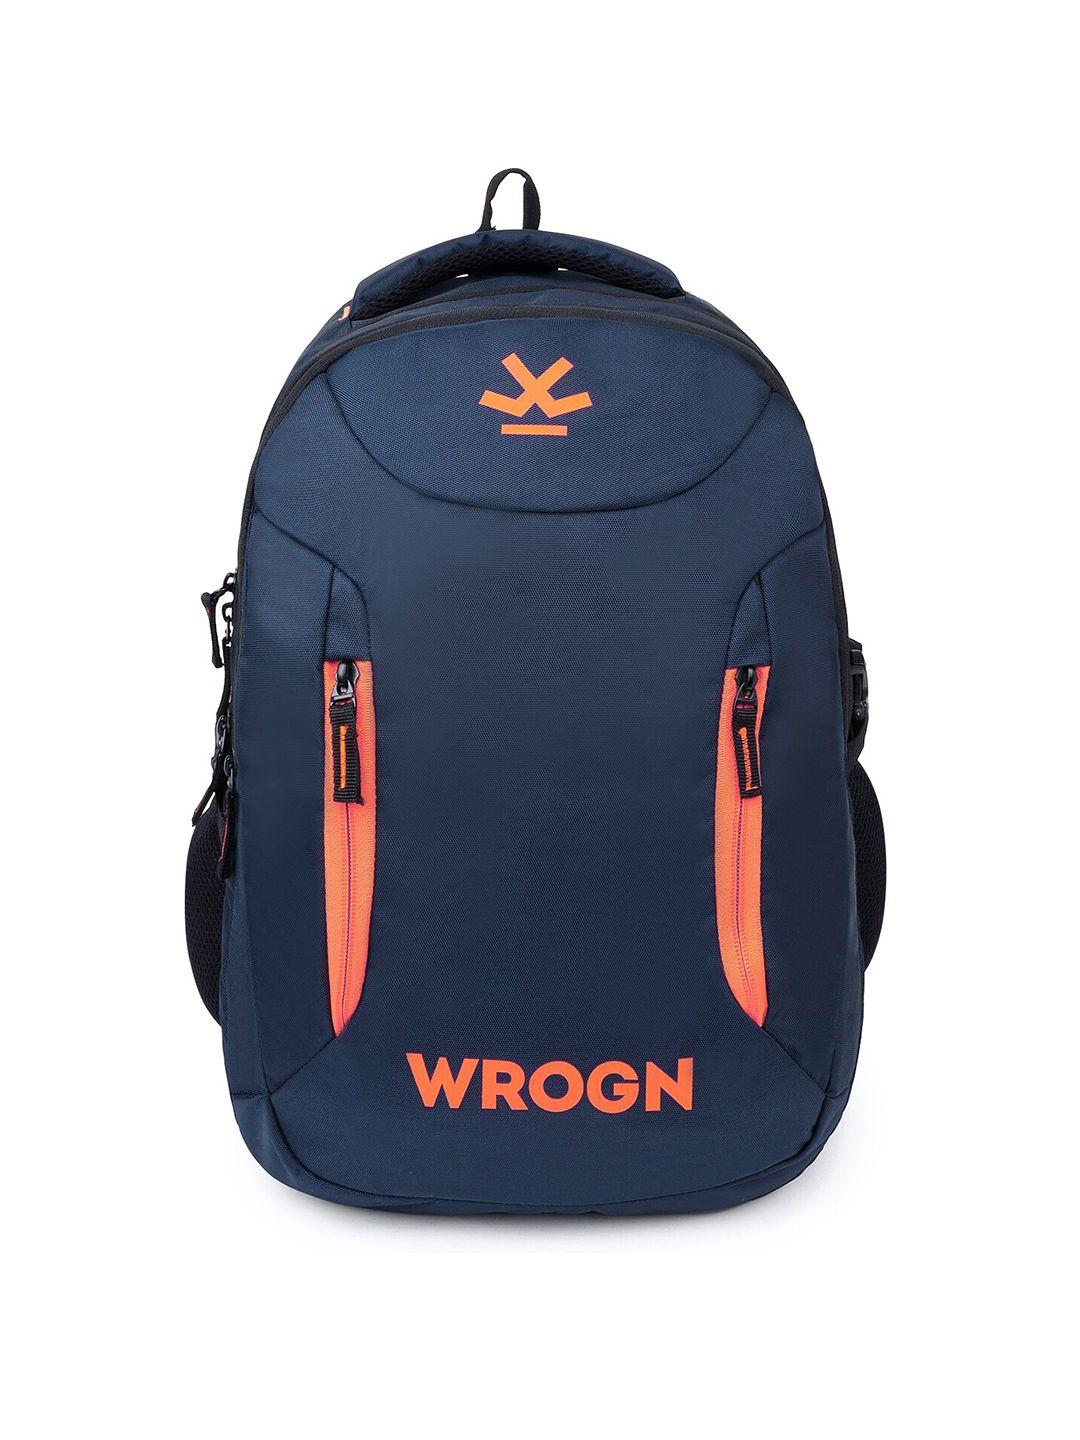 wrogn-water-resistant-backpack-with-shoe-pocket